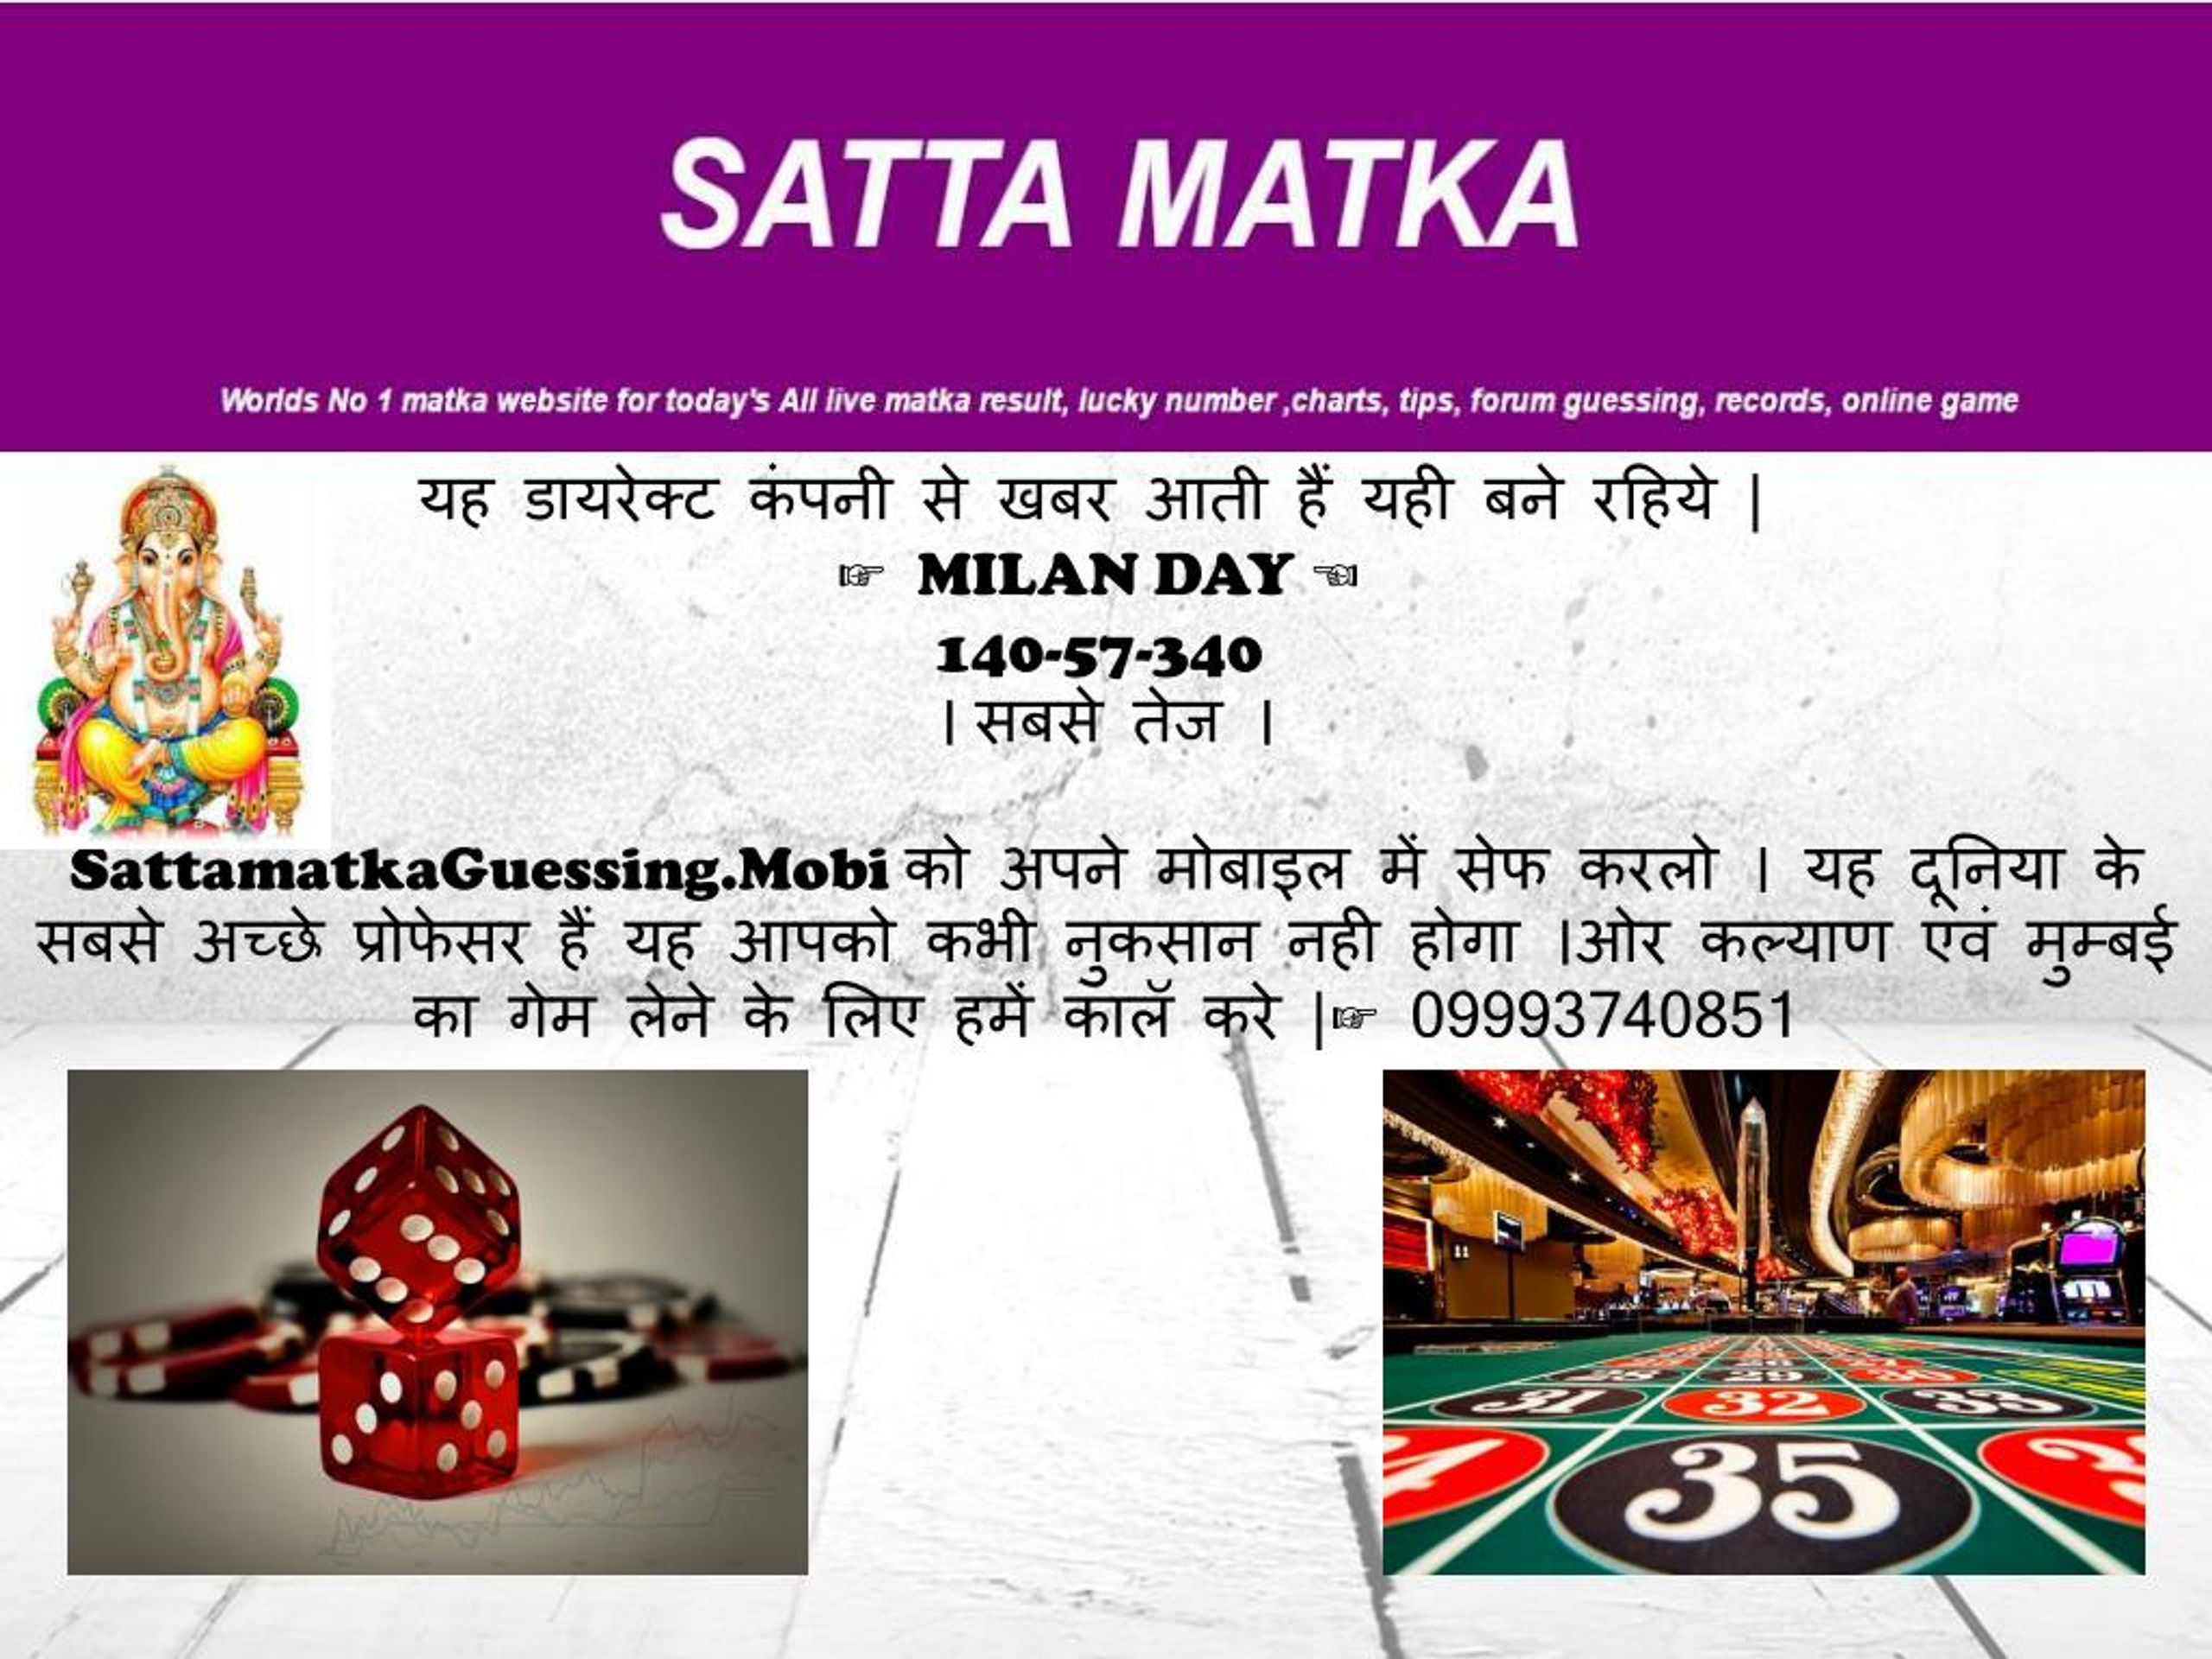 matka guessing 143 24 live